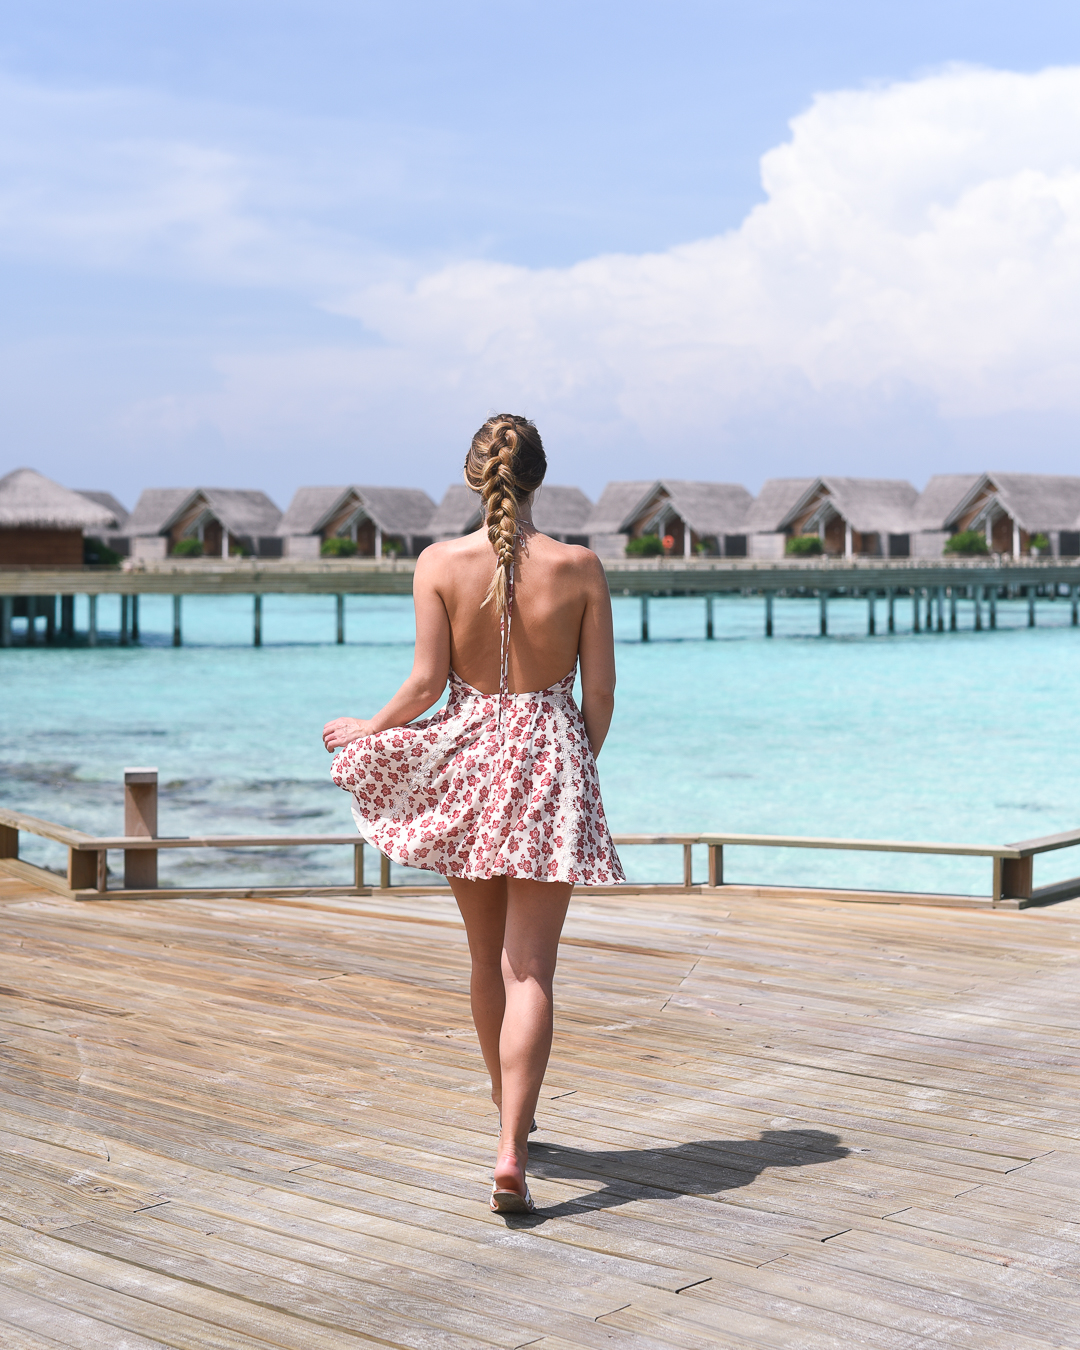 things to do in the maldives - Maldives Resort Review: Milaidhoo by popular Chicago blogger Visions of Vogue